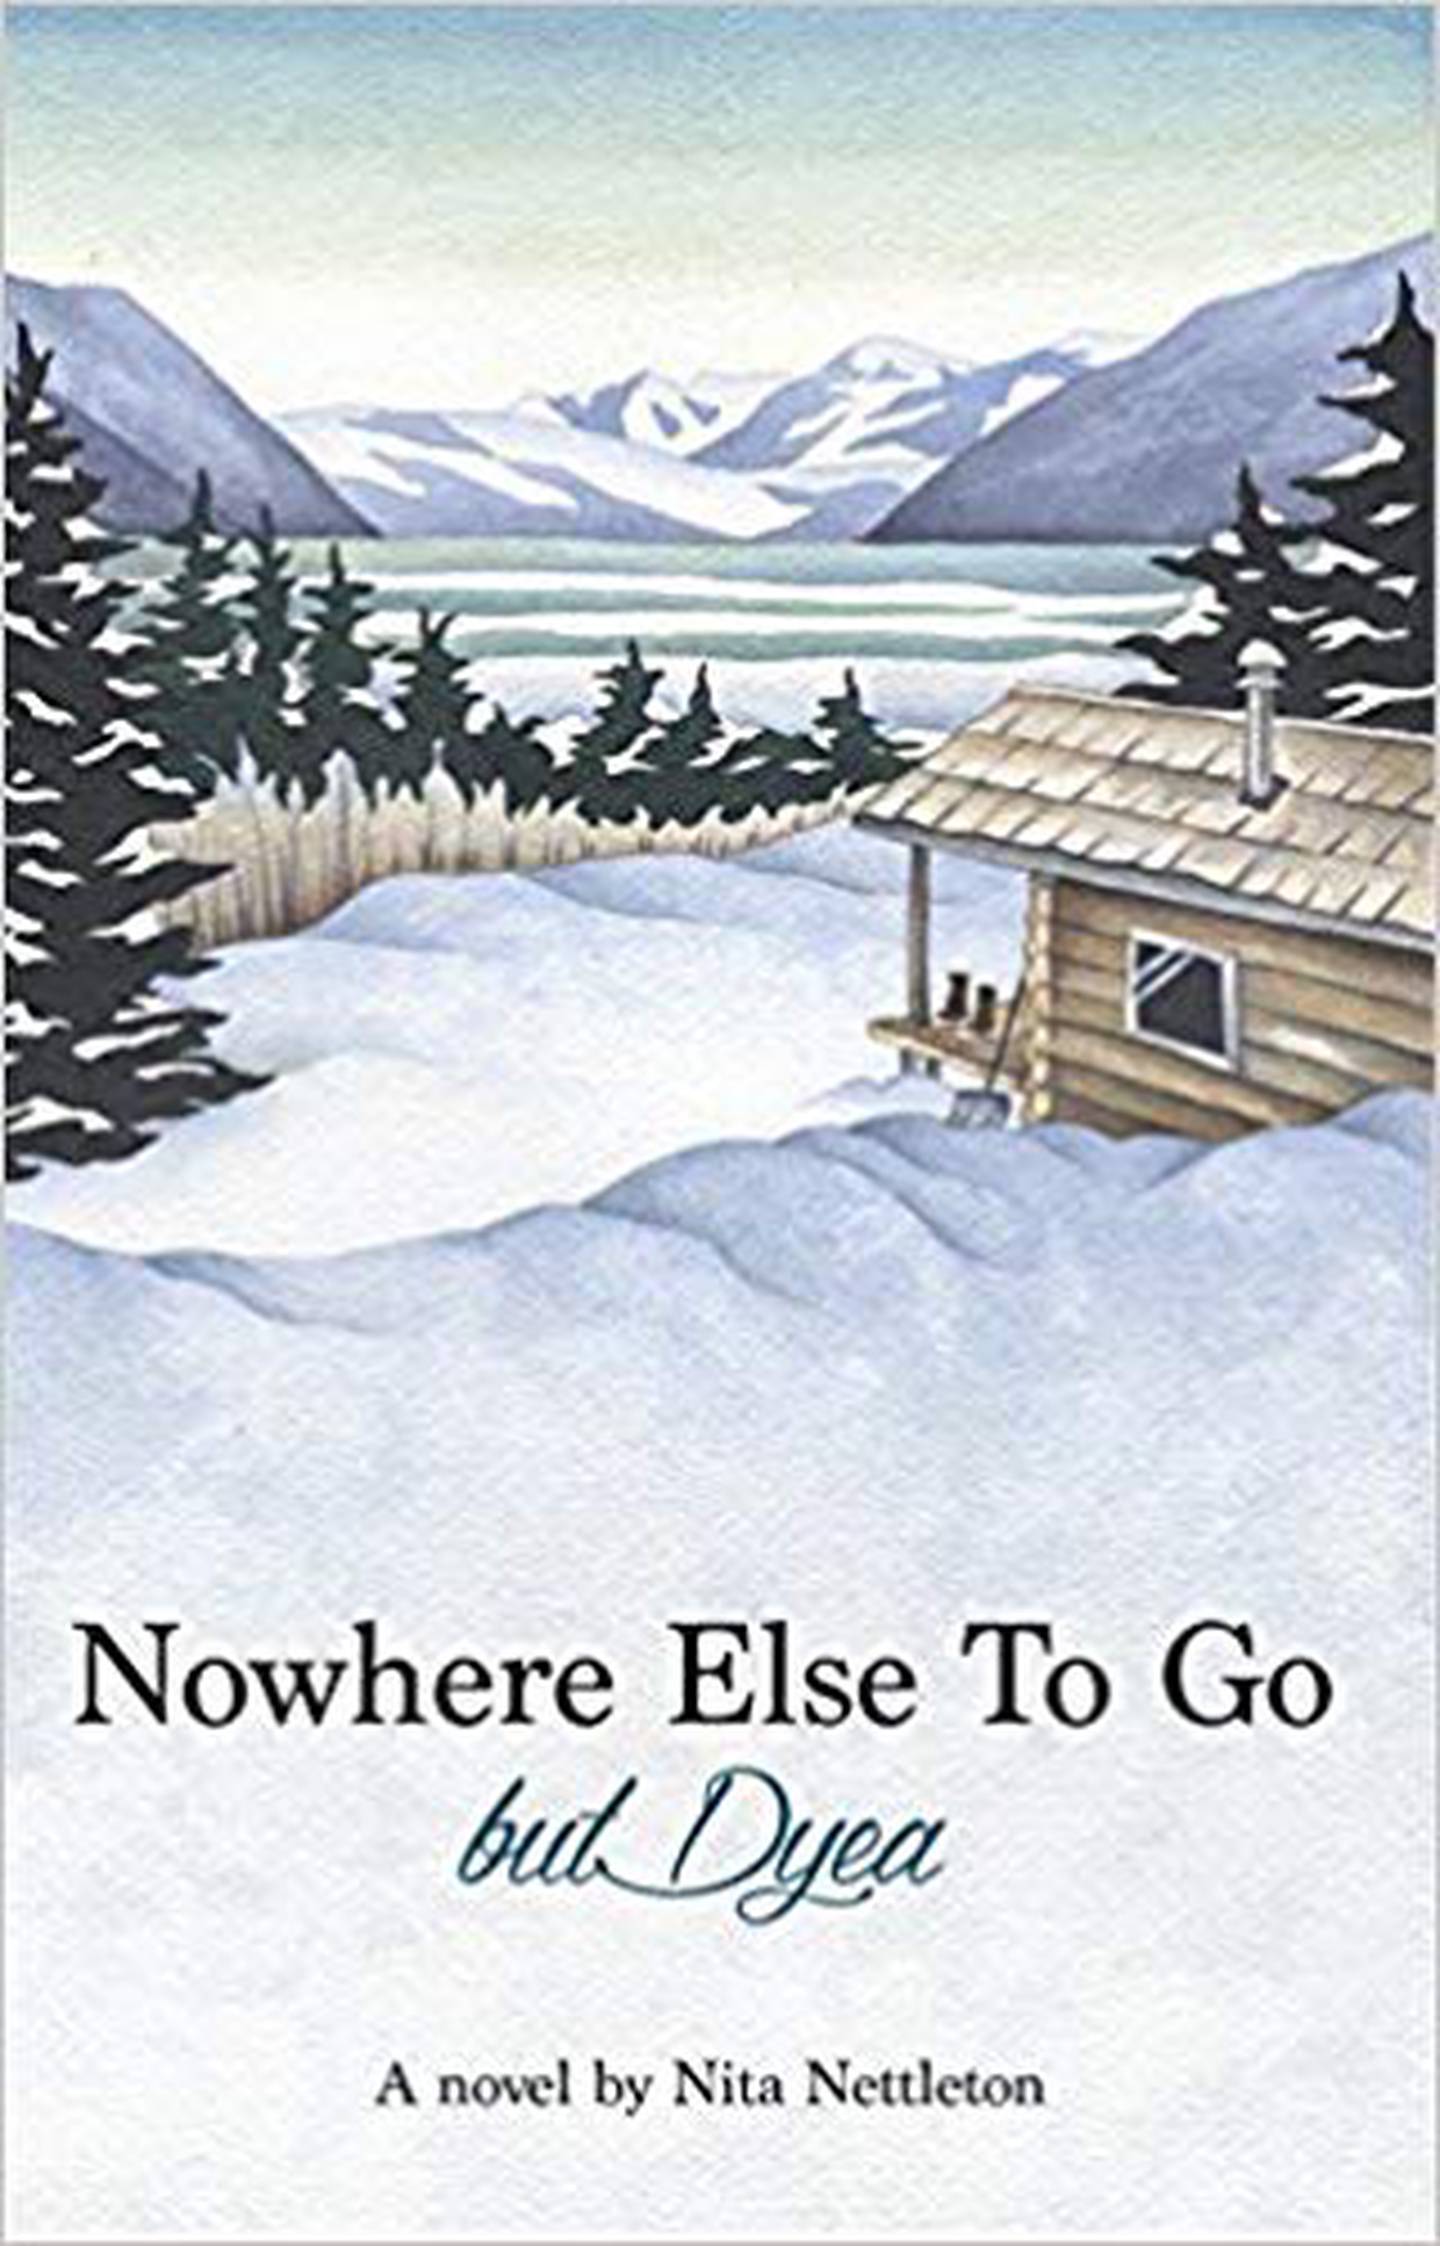 “Nowhere Else to Go, but Dyea,” by Nita Nettleton.